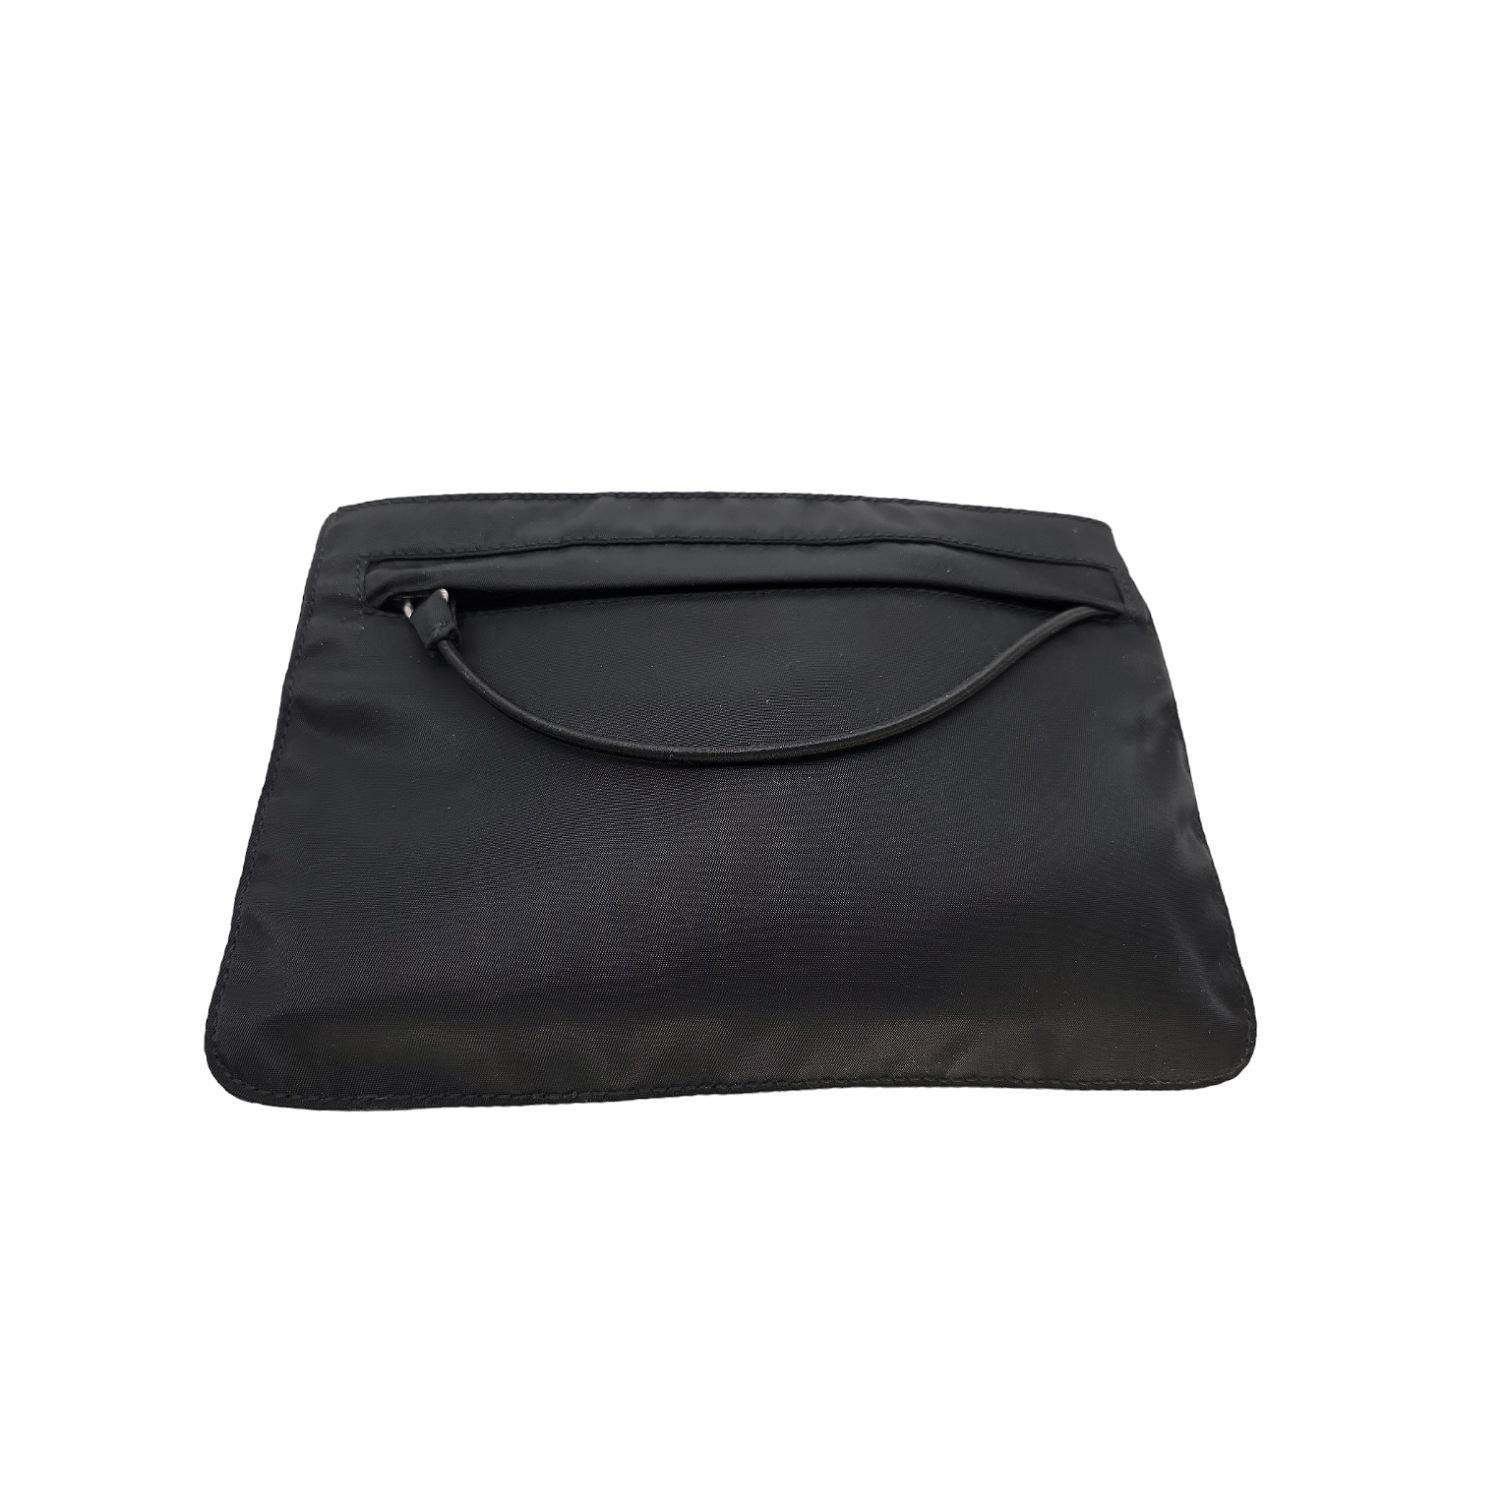 This Black Tessuto nylon pouch, is very versatile, it can be used as a cute little clutch or cosmetics pouch, or simply by unzipping the extra back pocket, it could even accommodate as a wristlet. It is perfectly functional, for any day, any time.